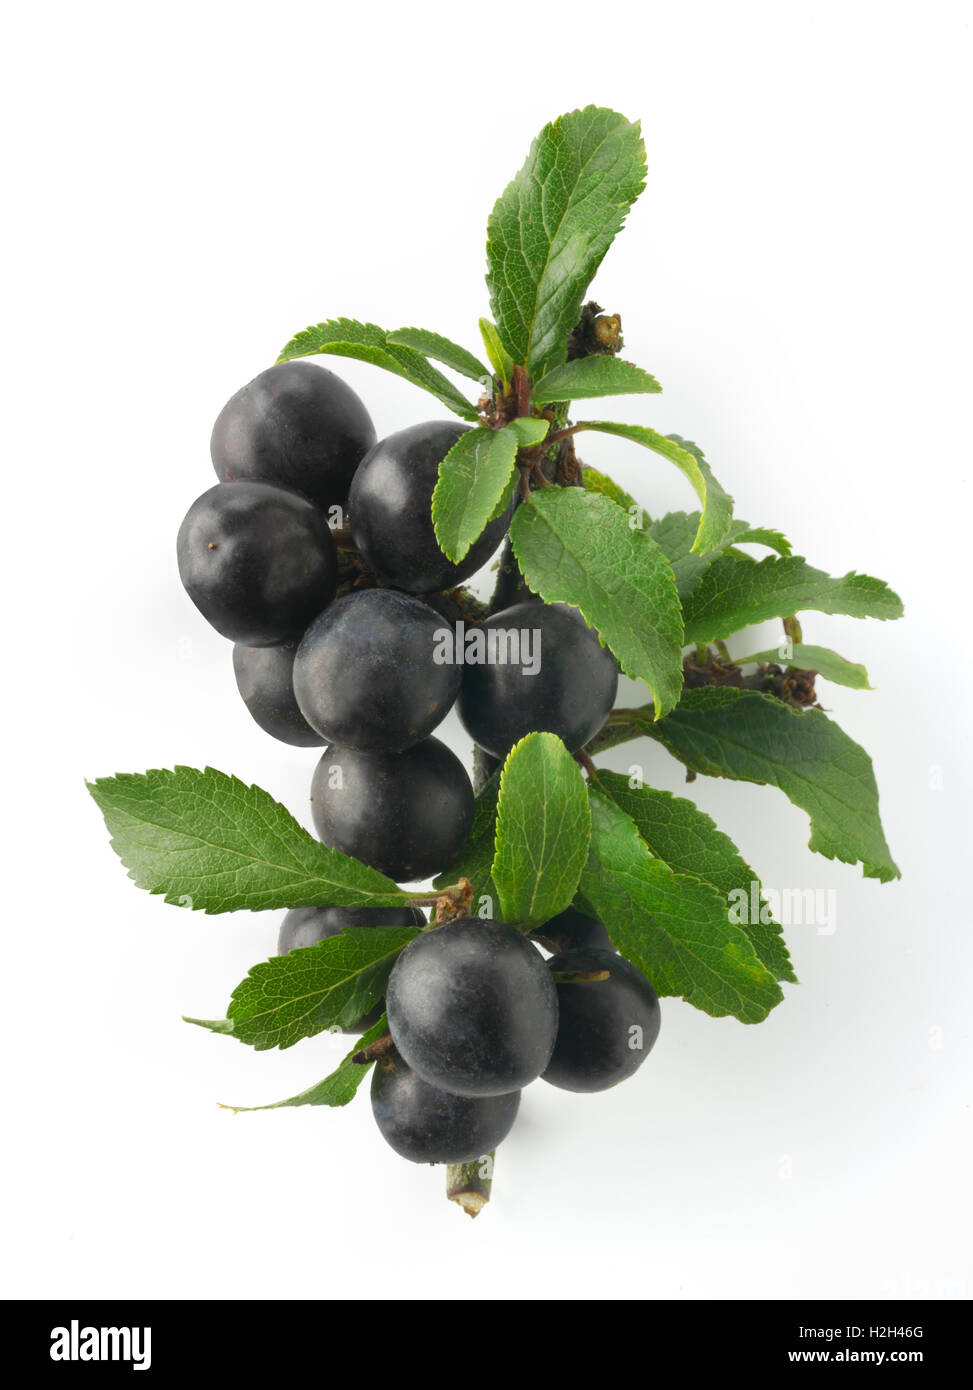 Fresh picked sloe berries and leaves from the blackthorn bush (Prunus spinosa ) against a white background Stock Photo